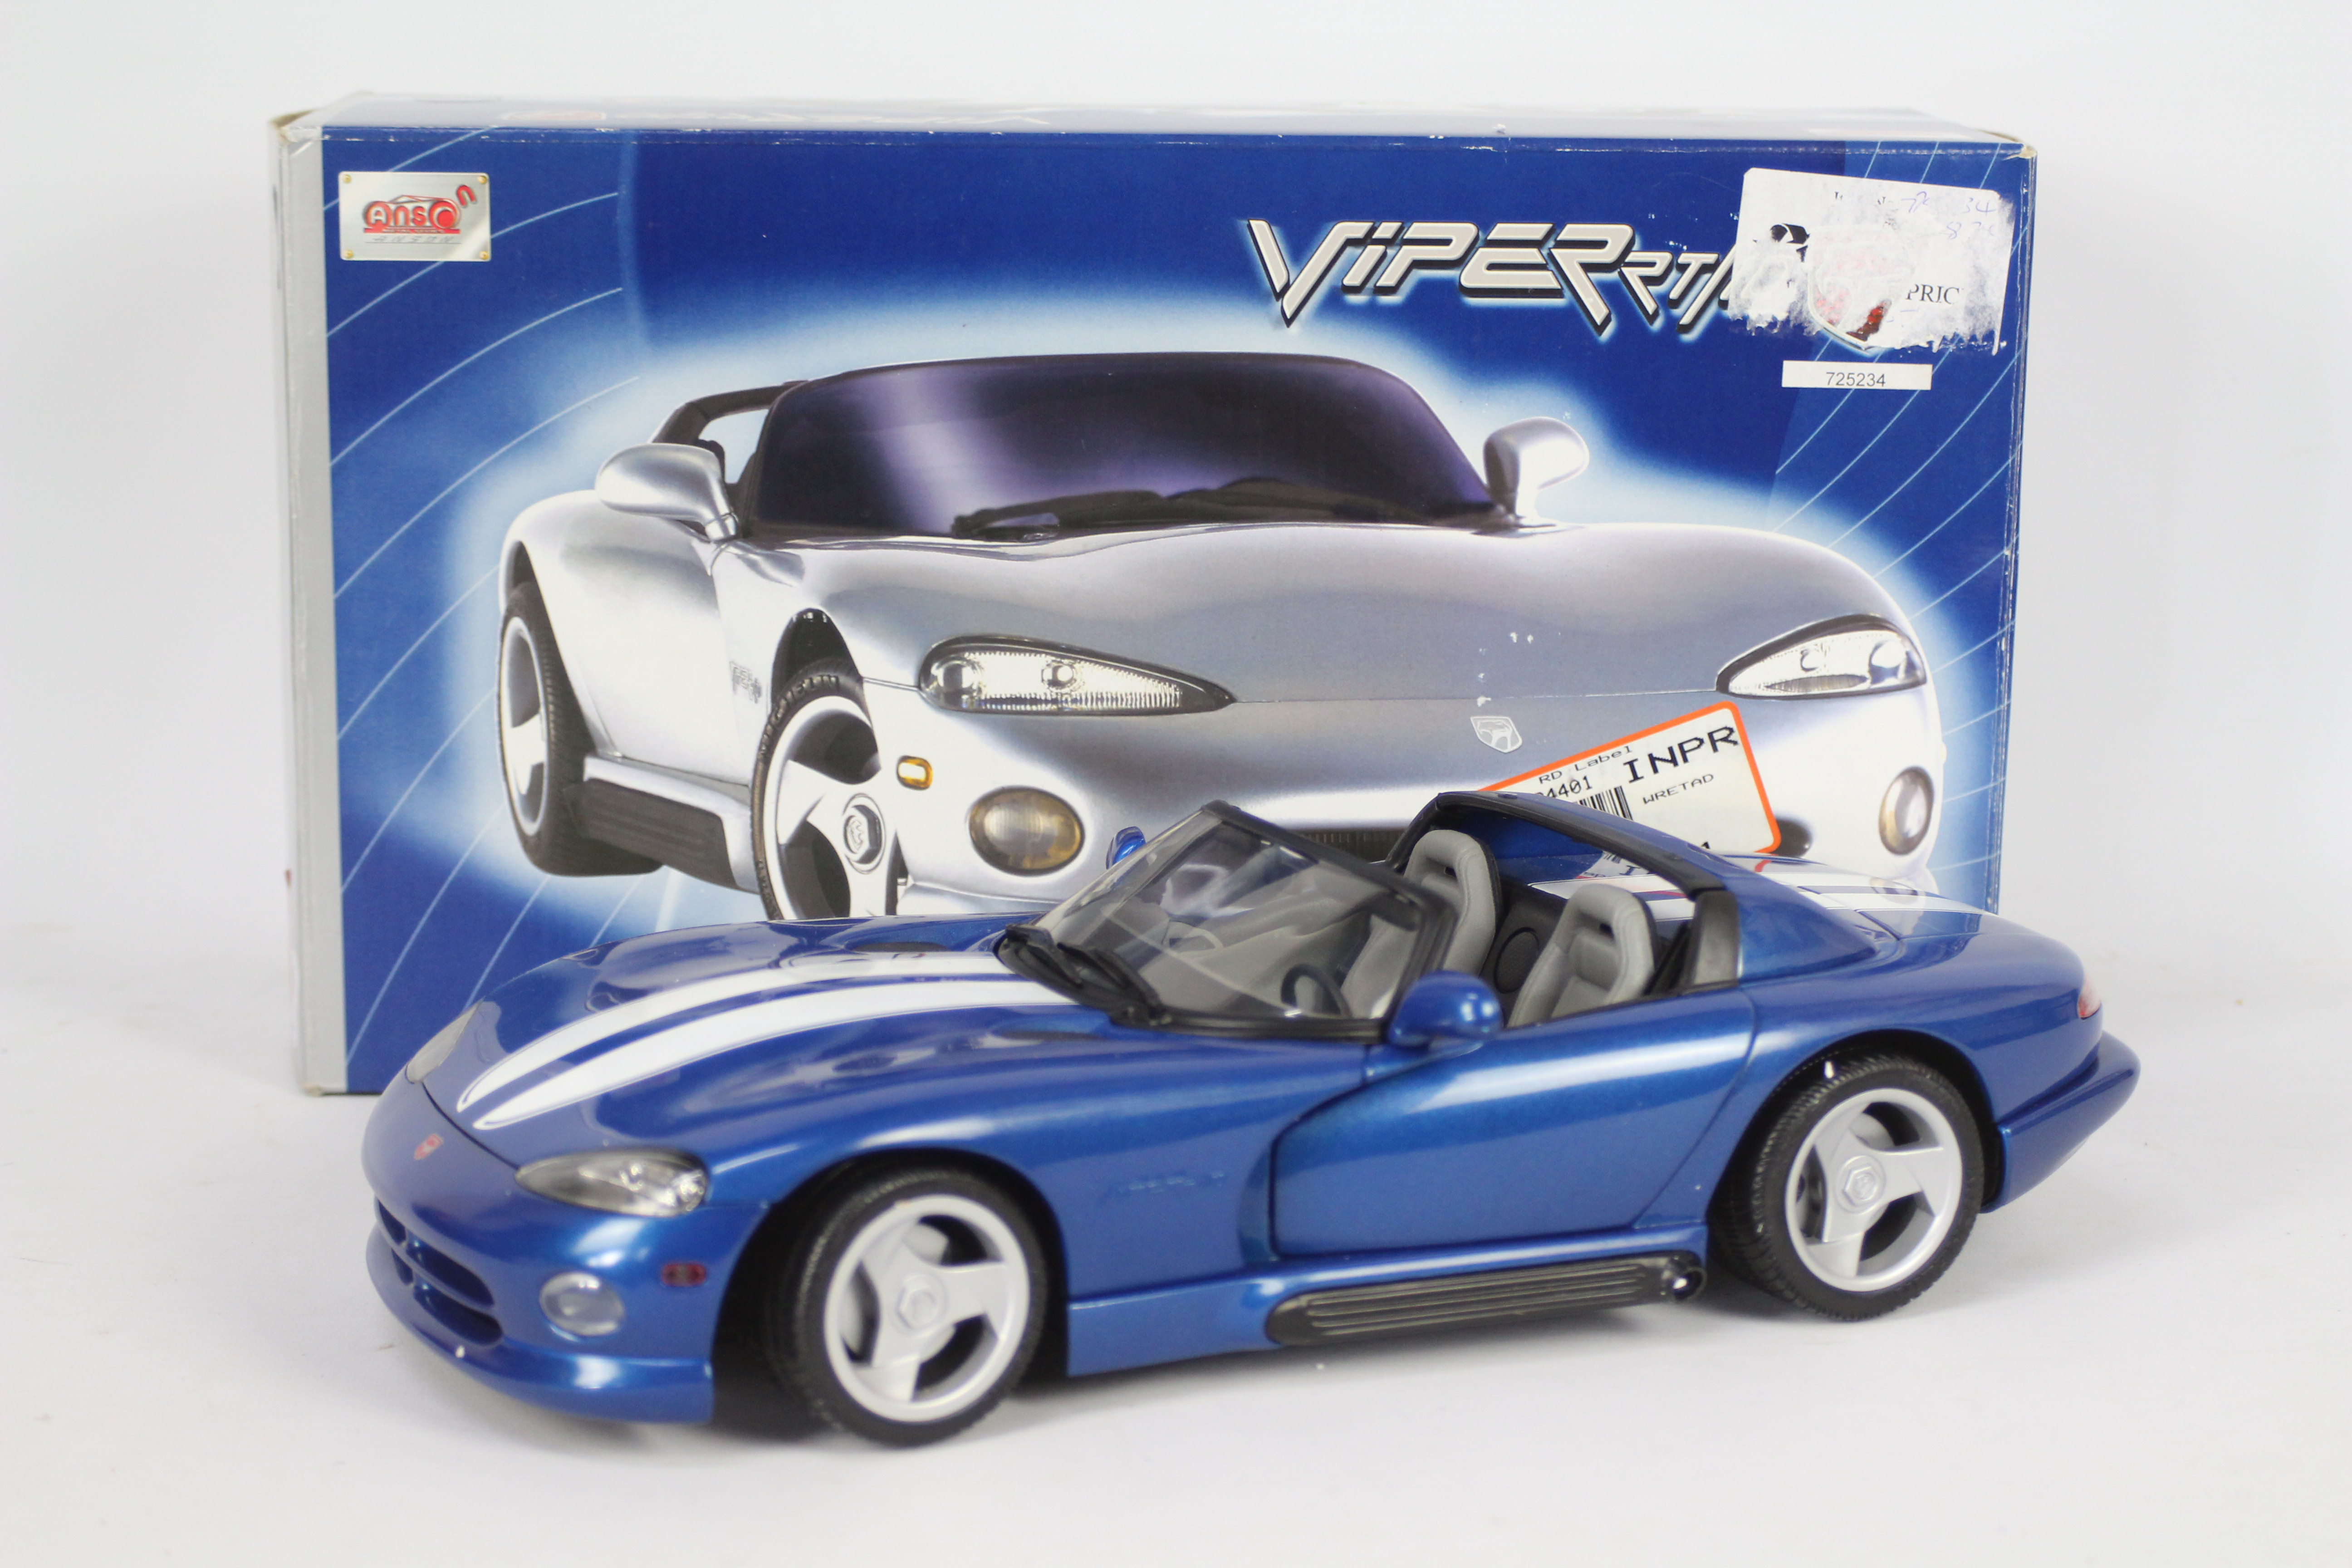 Anson - A boxed Limited Edition 1:12 scale Dodge Viper RT/10 by Anson.